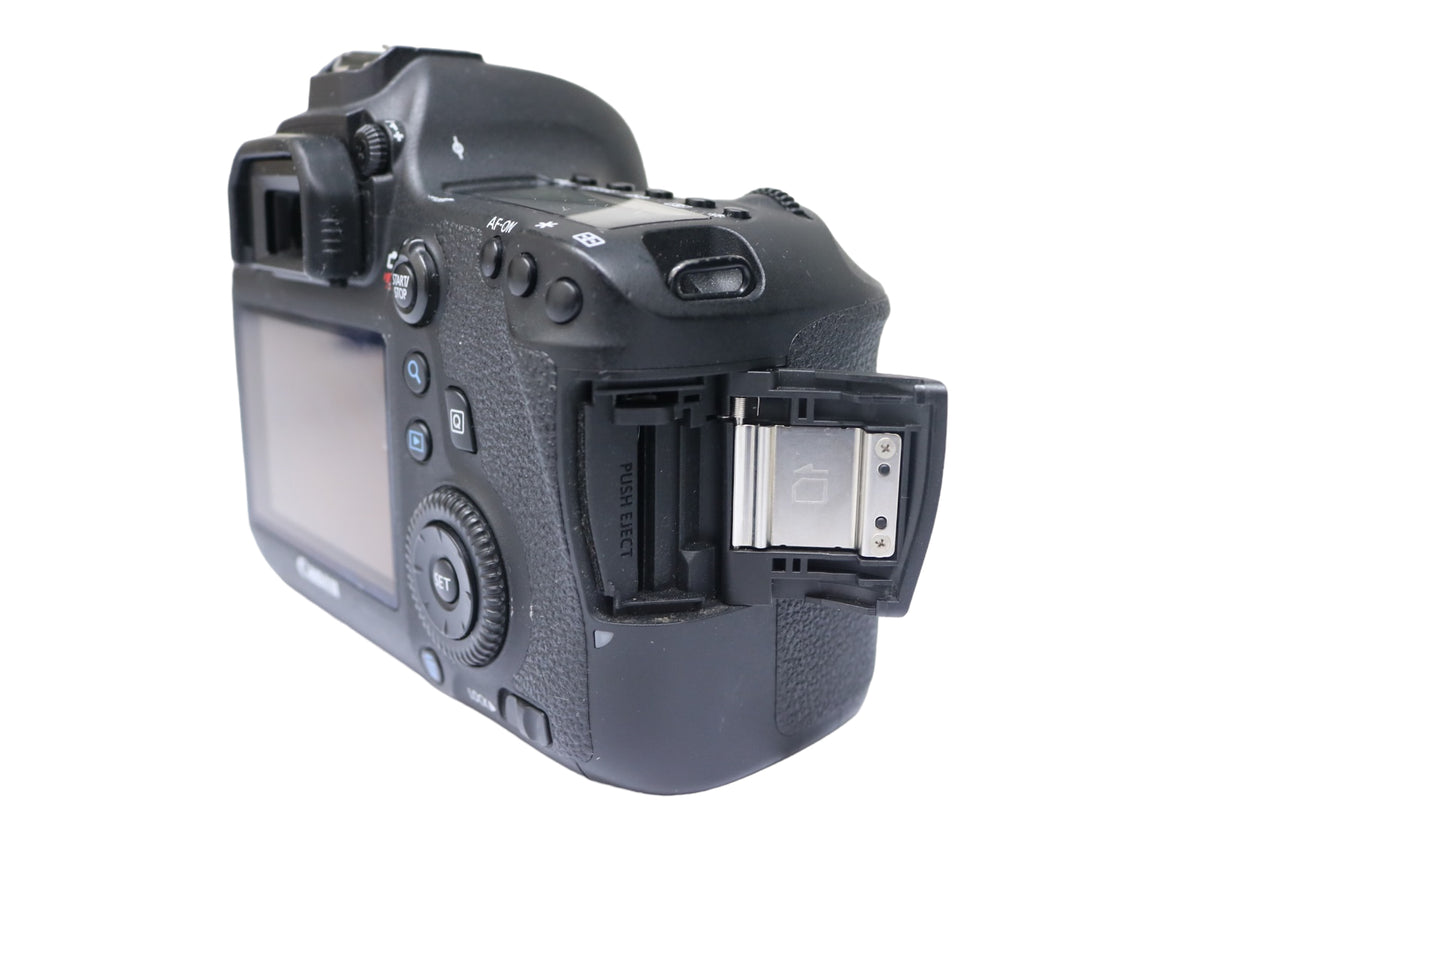 Canon DS126401 EOS 6D(WG) (Body Only)